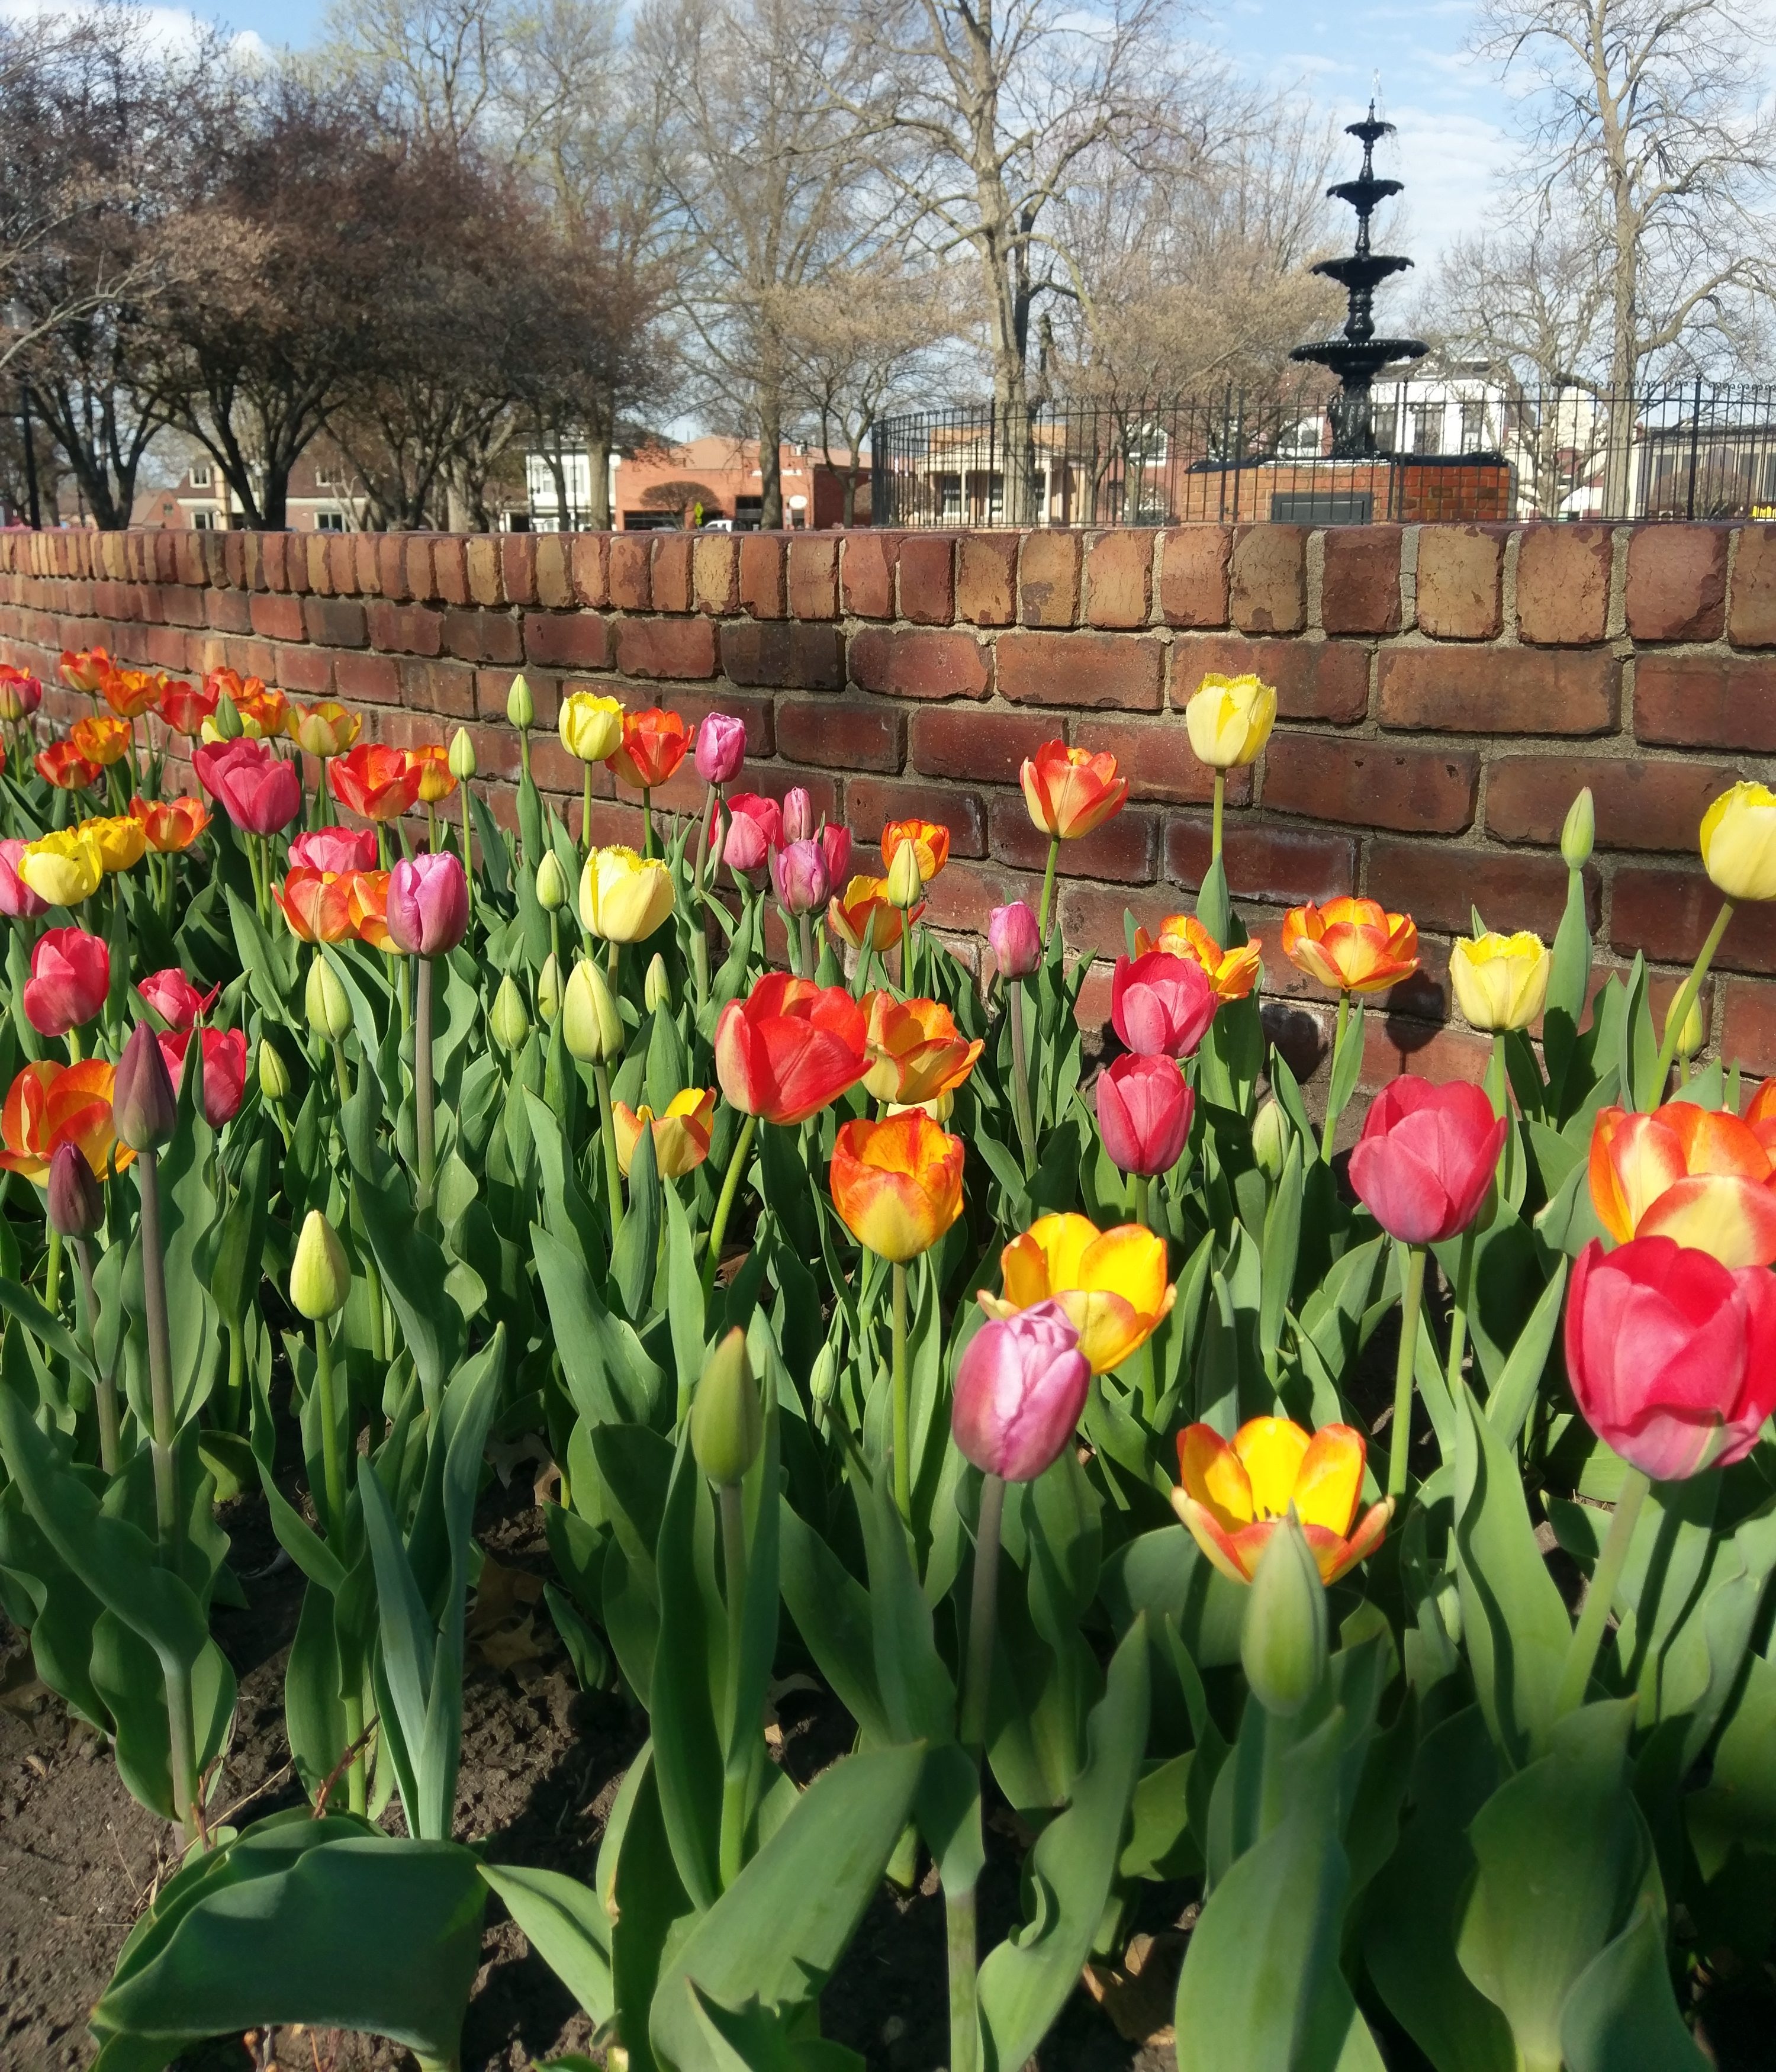 Tulips Reaching Peak Bloom Just in Time for 83rd Annual Festival ...